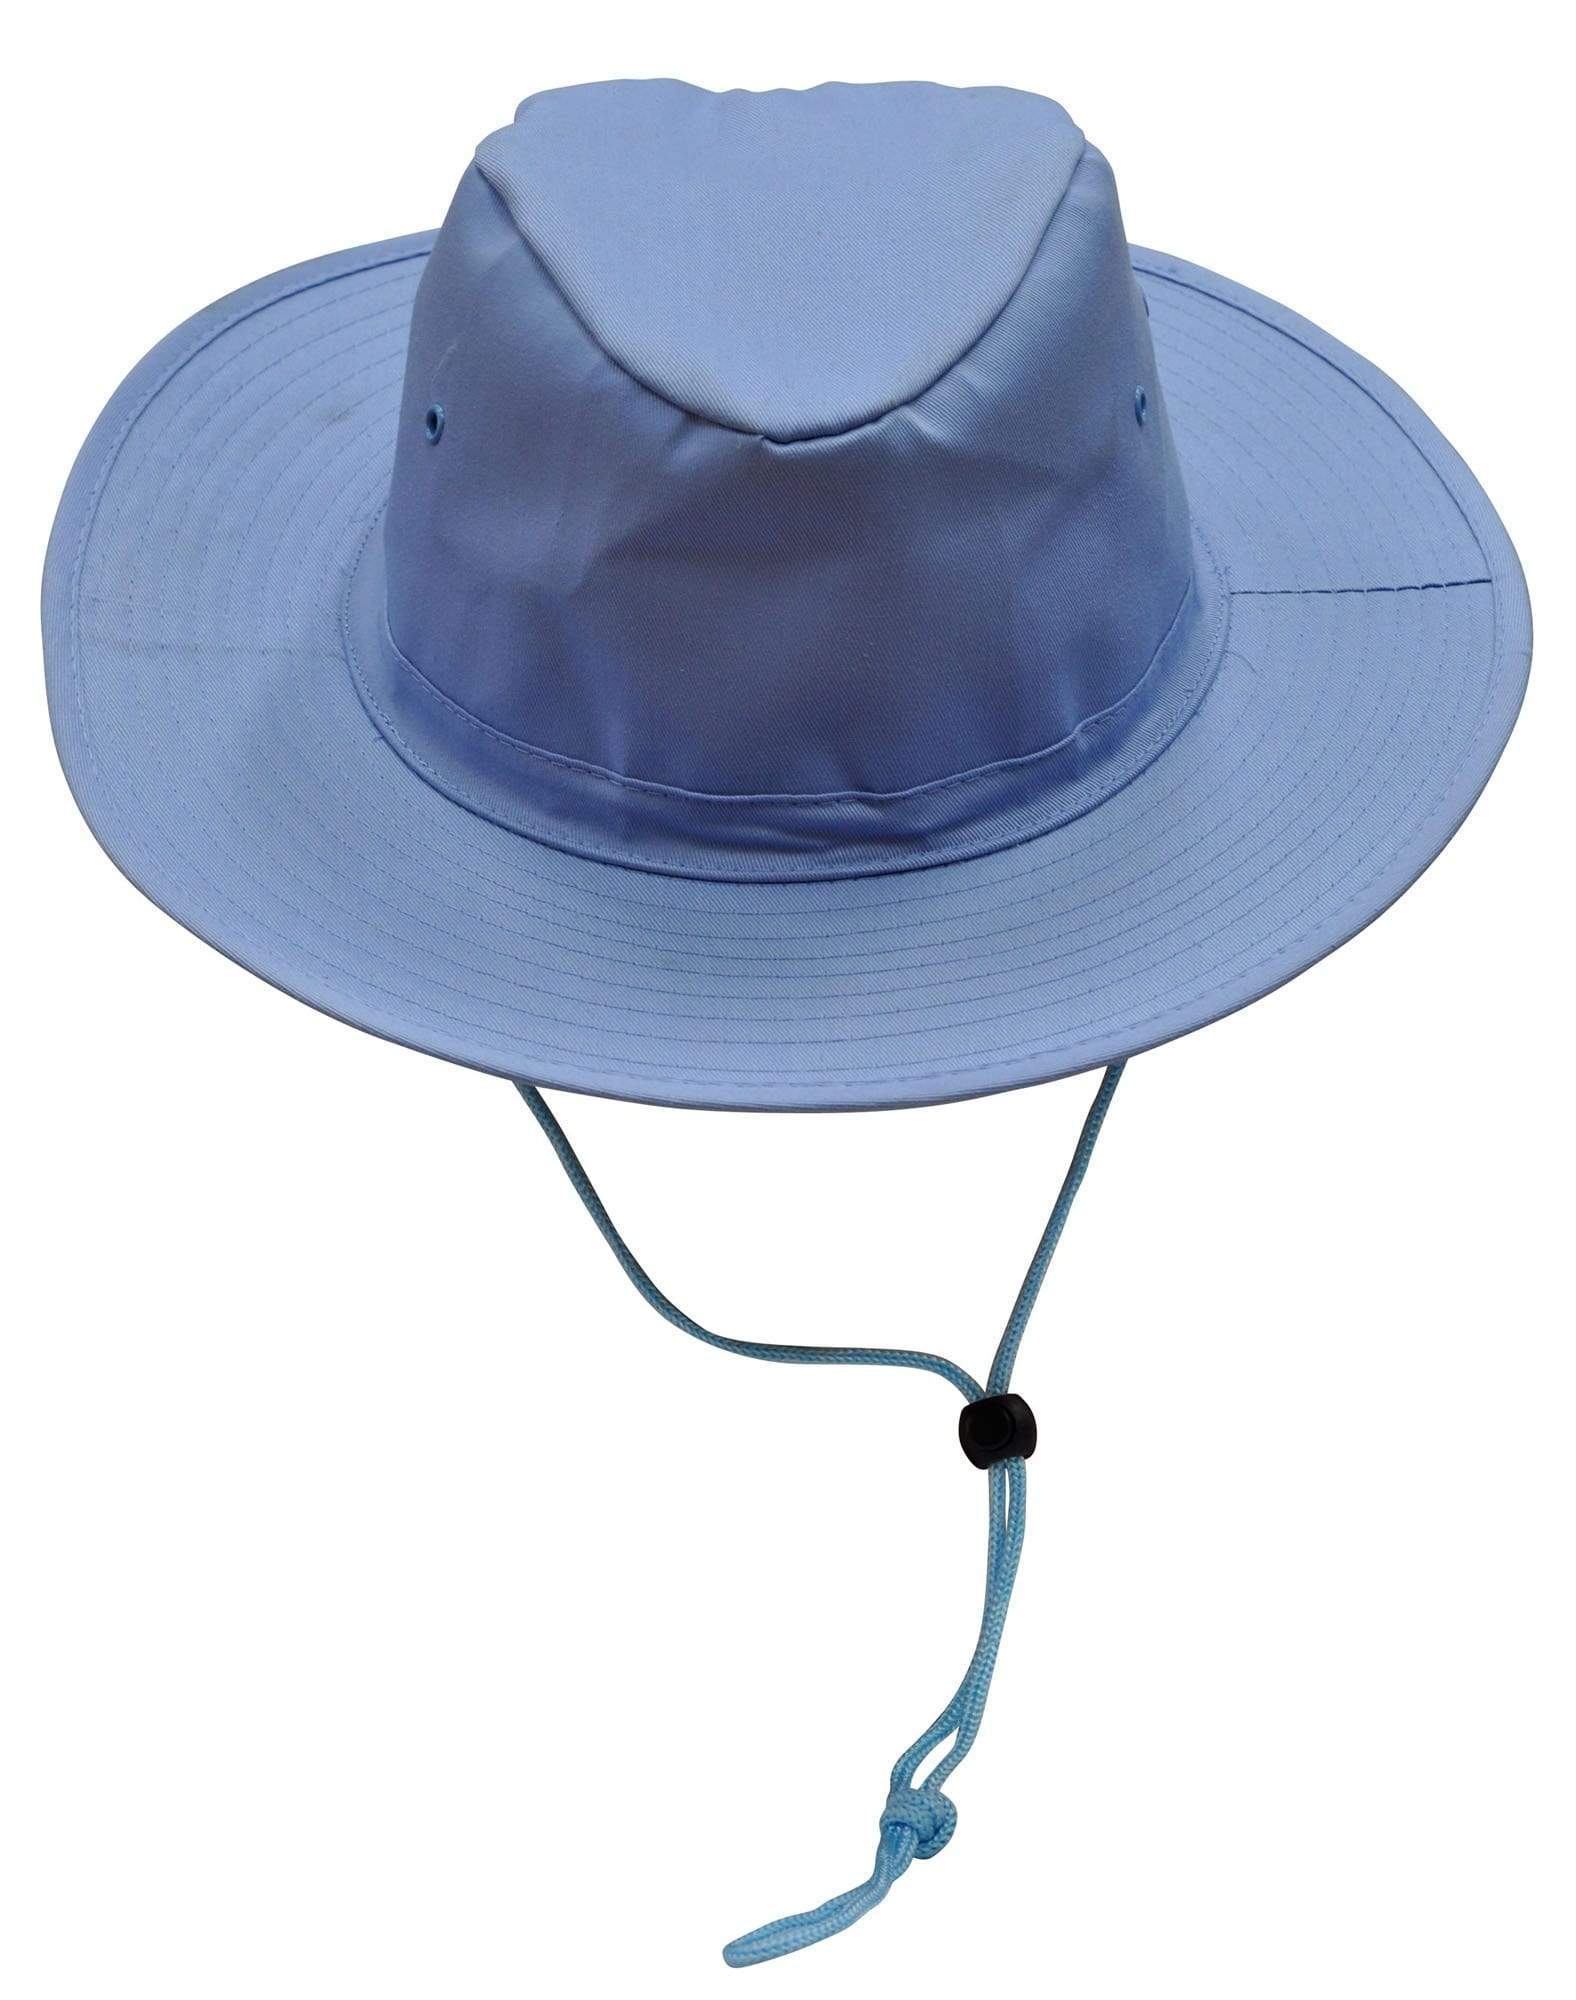 Slouch Hat With Break-away Clip Strap H1026 Active Wear Winning Spirit Skyblue S 